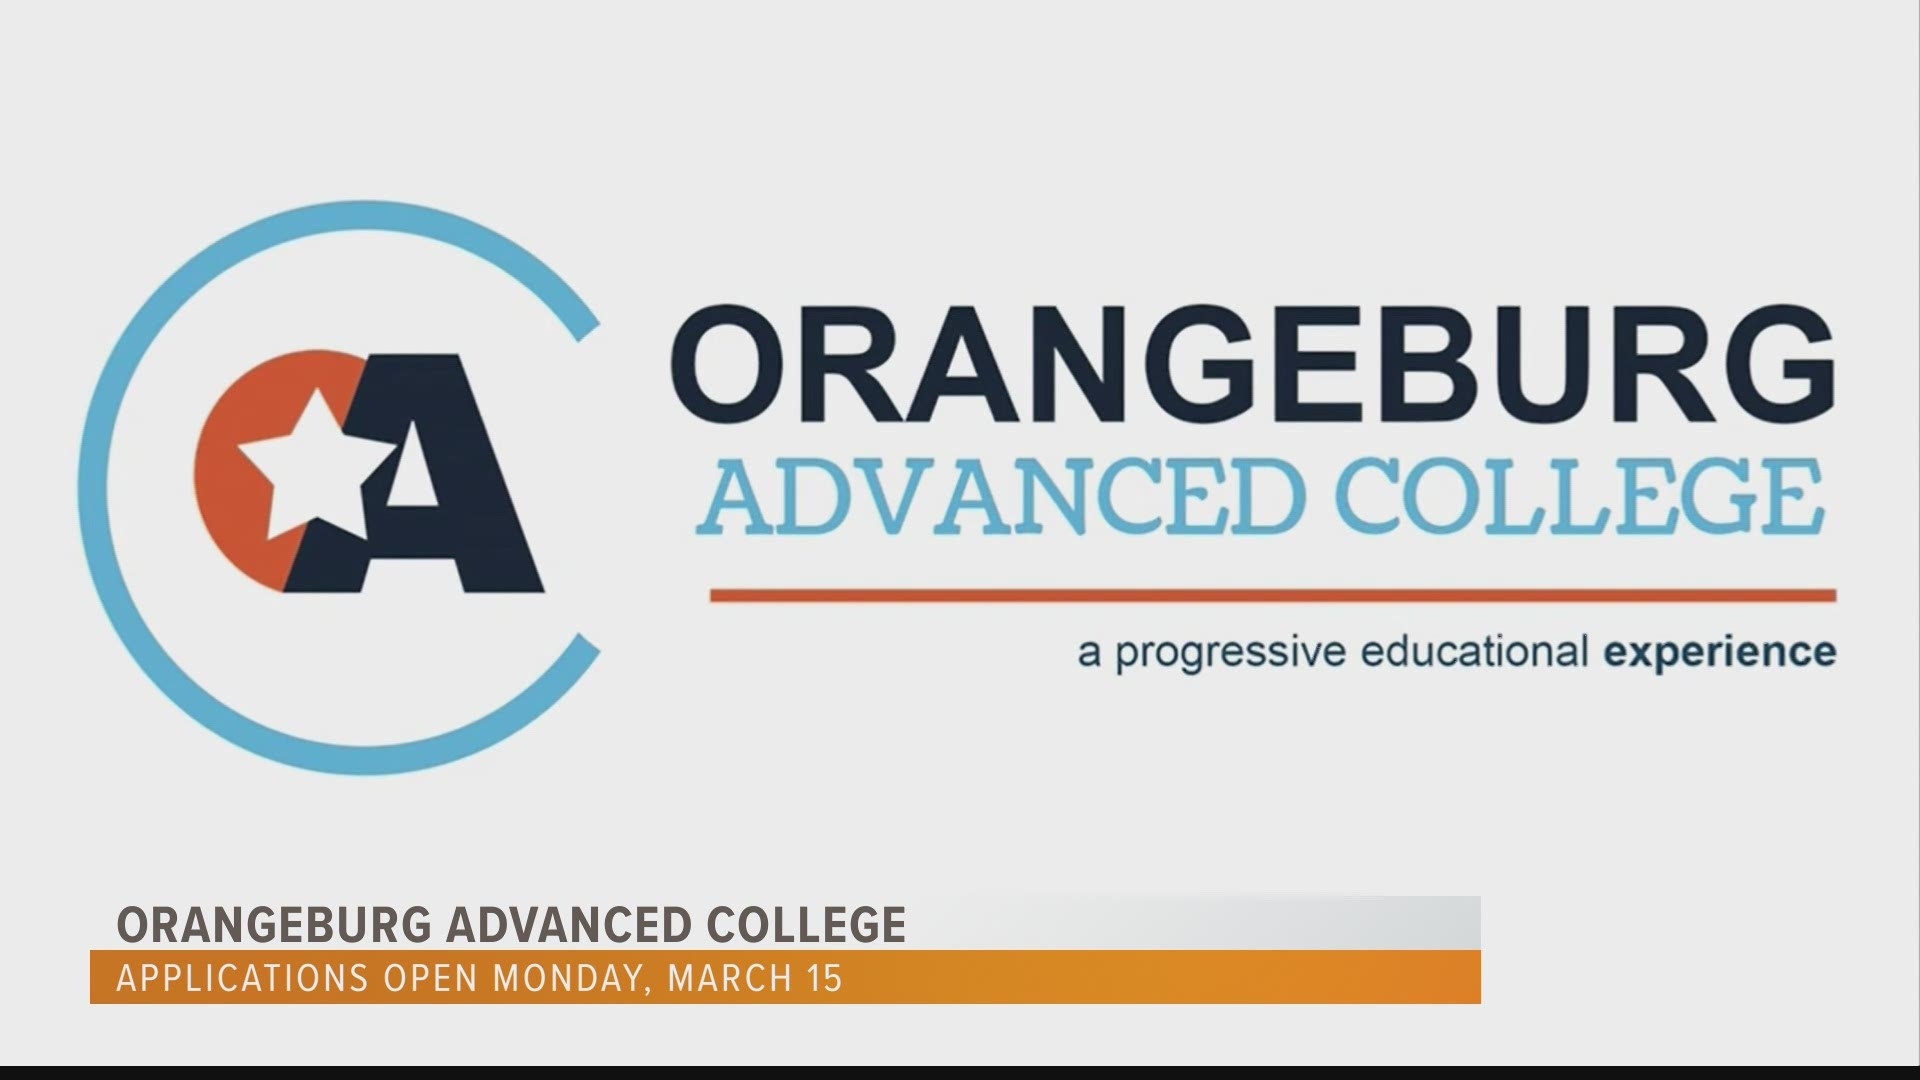 The application window is now open for Orangeburg County students looking to attend the Orangeburg Advanced College.